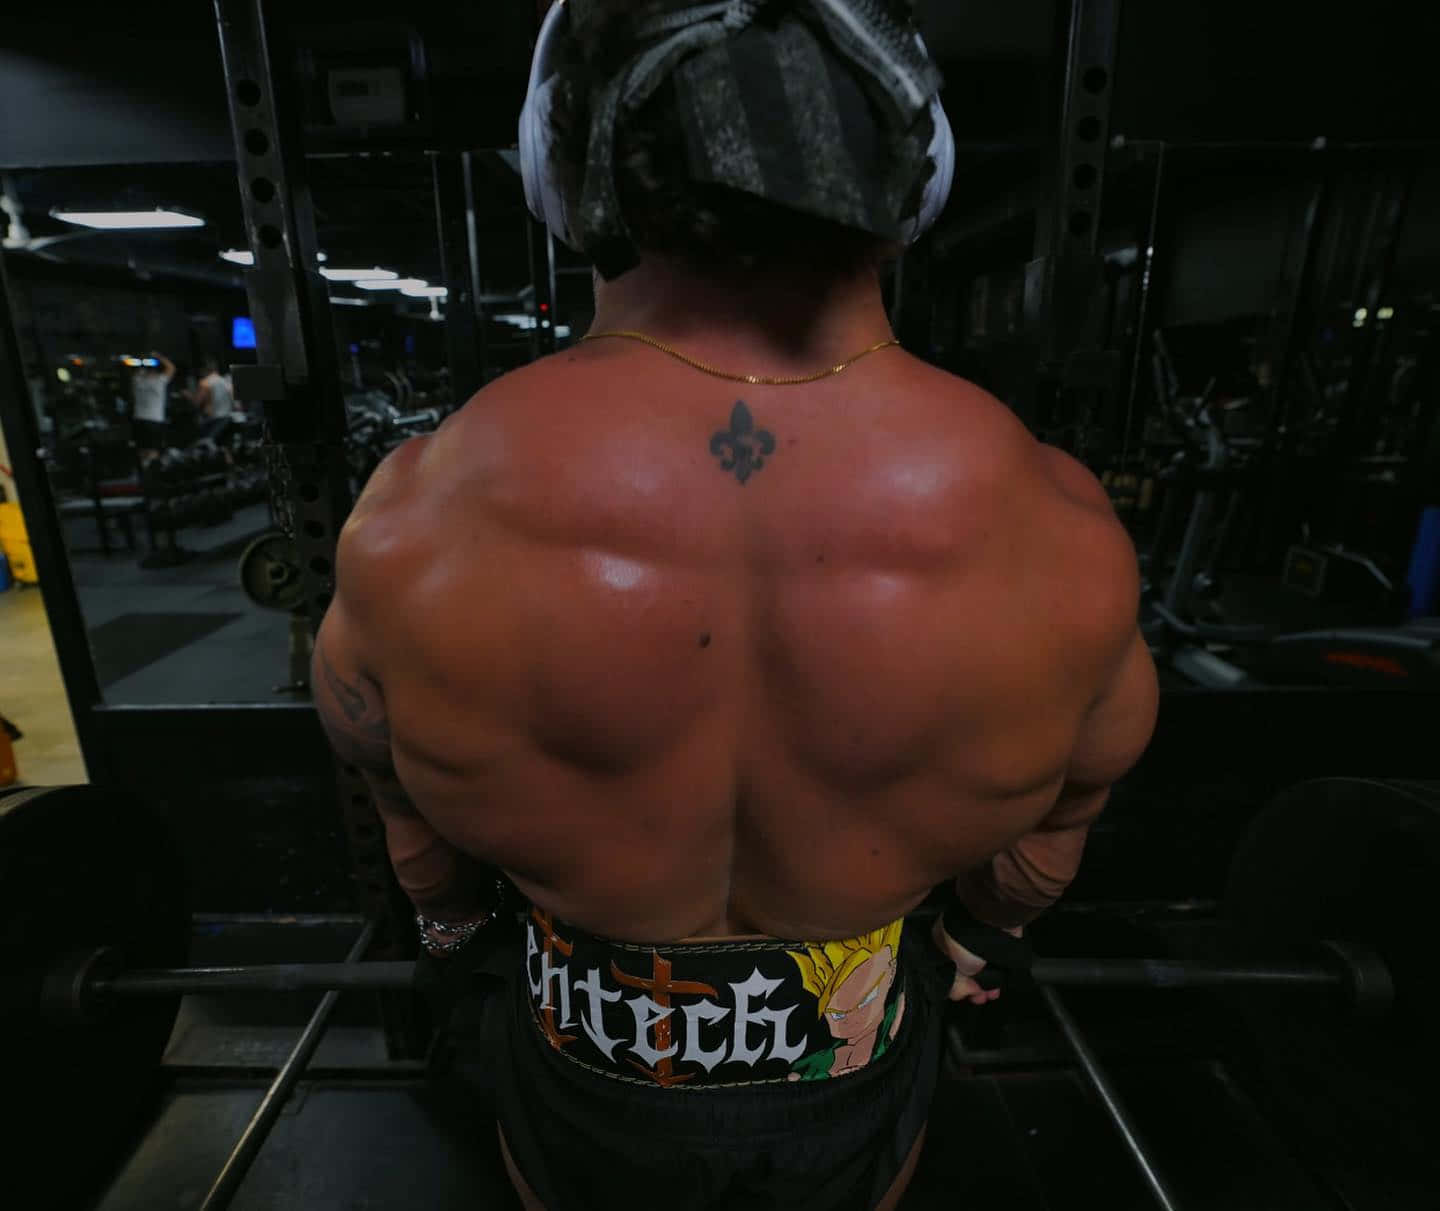 Muscular Back Workout Session Wallpaper